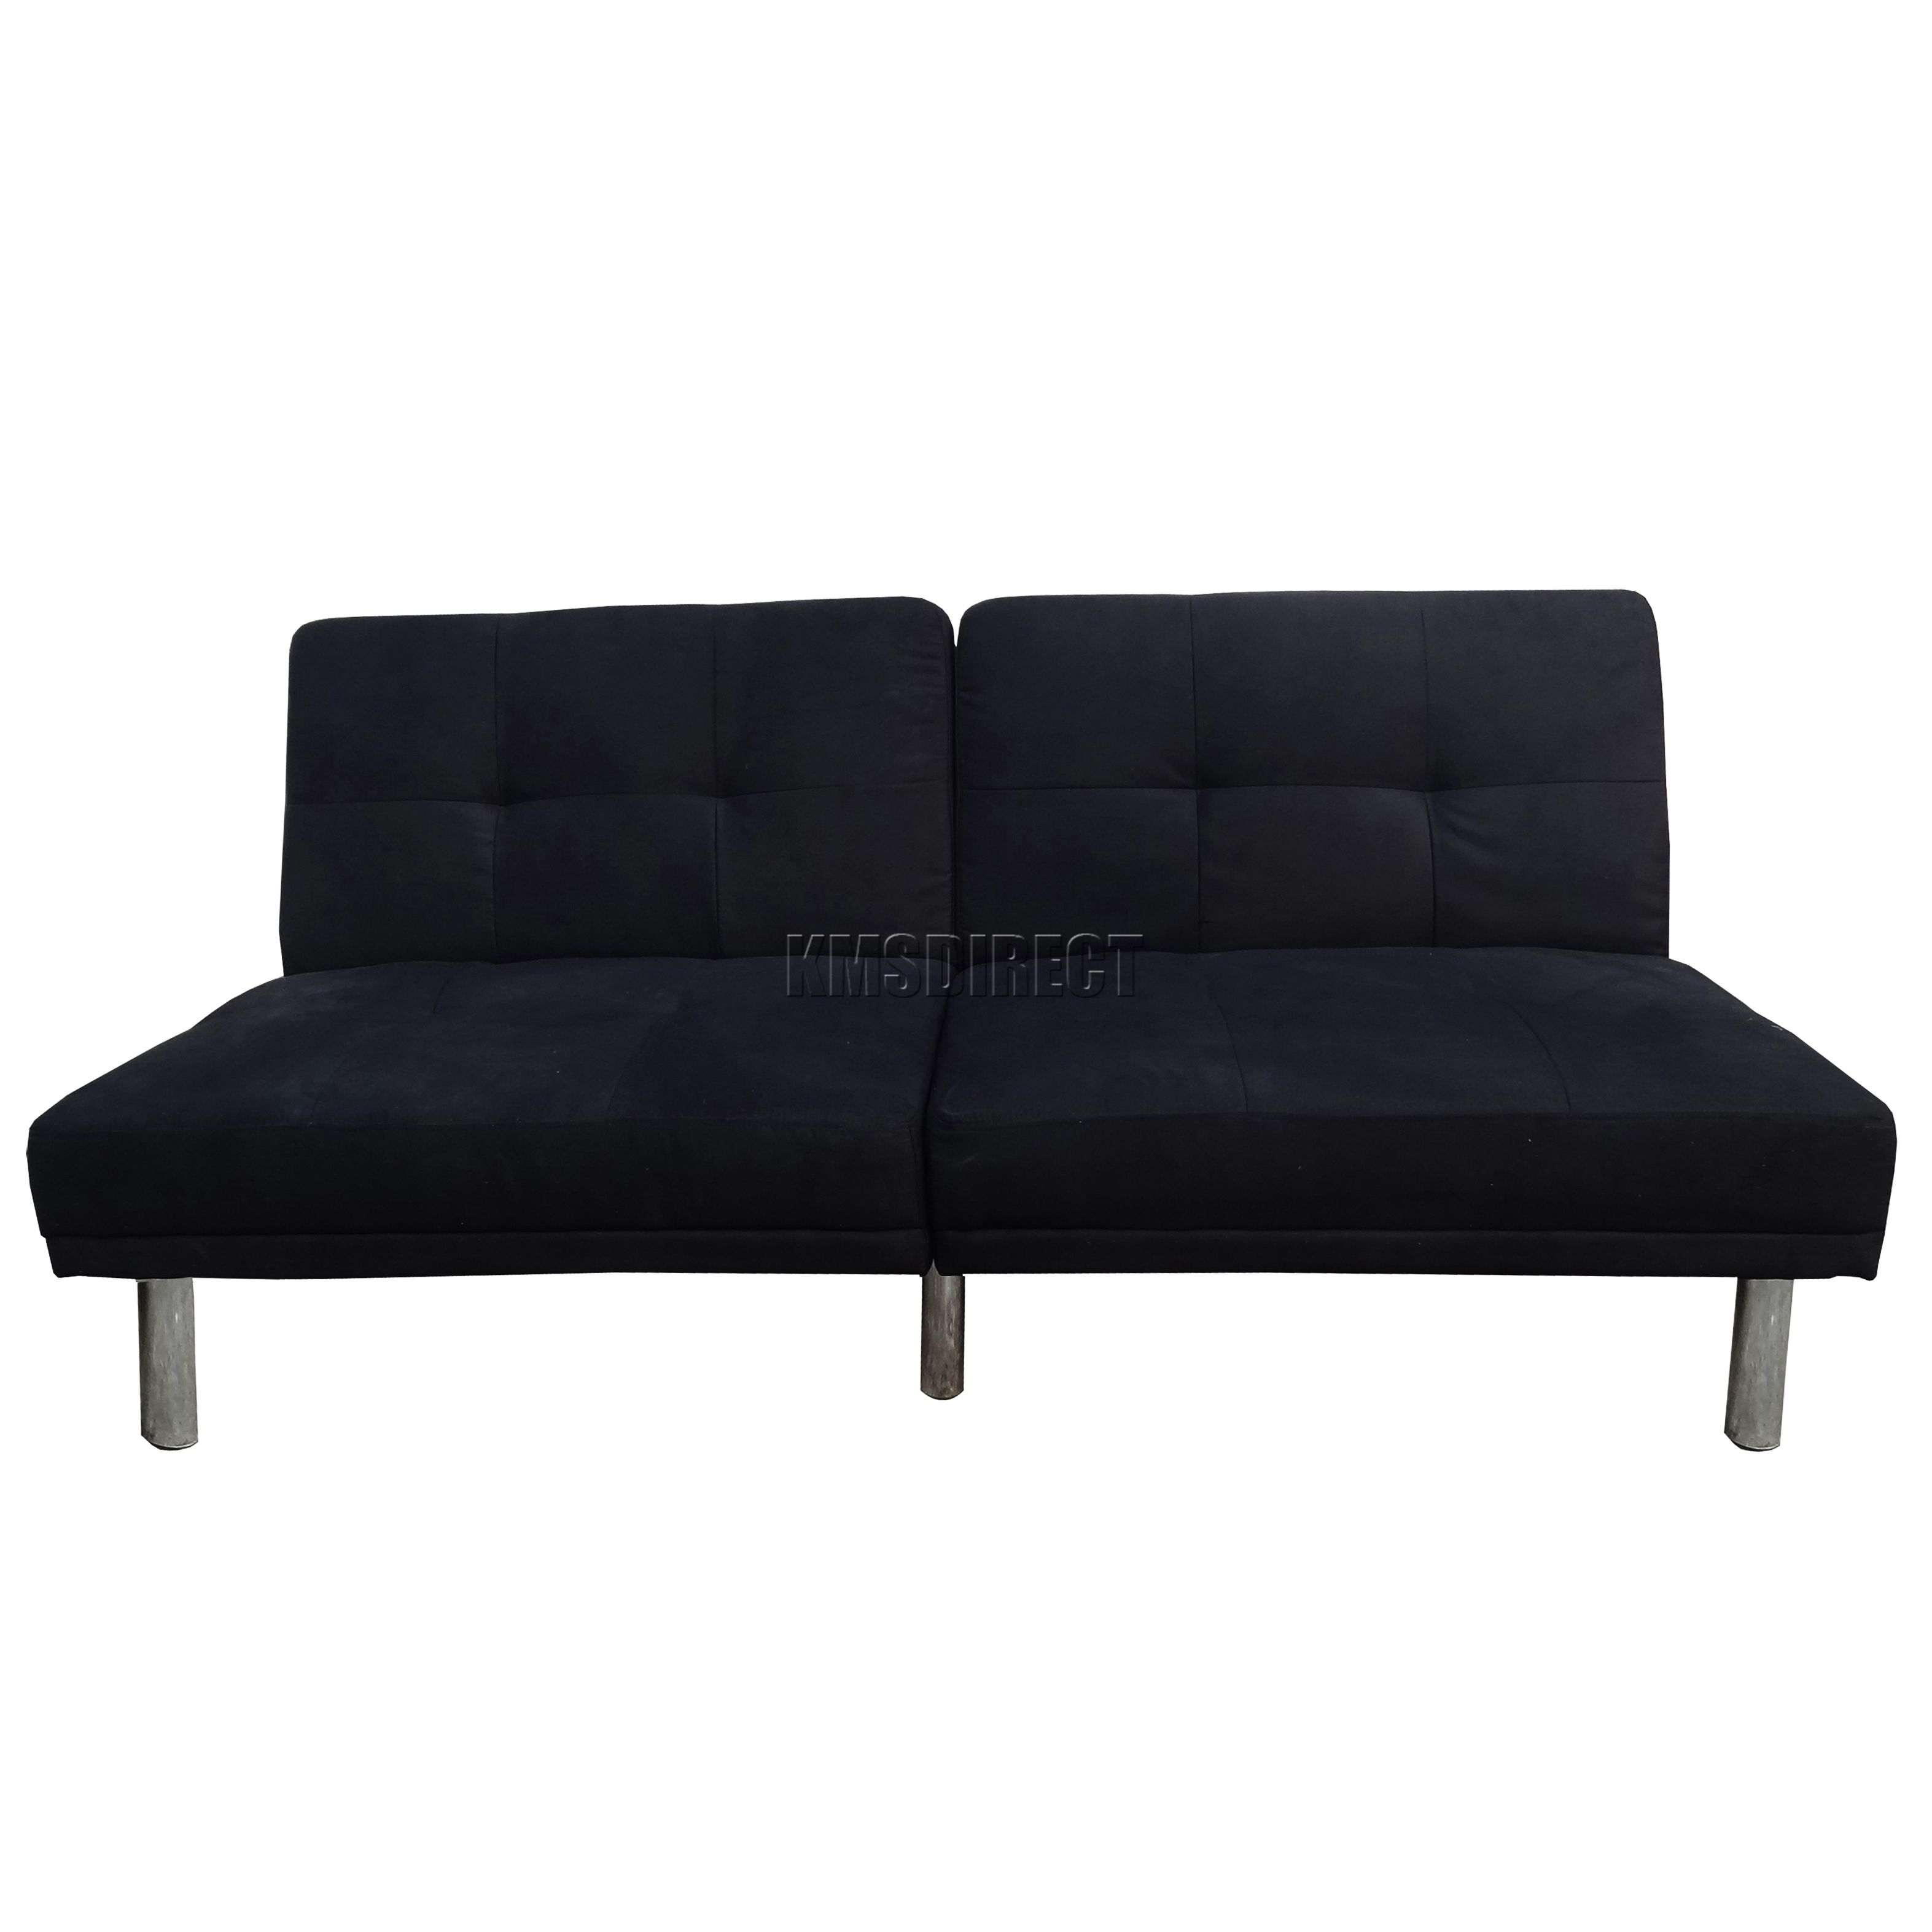 Foxhunter Fabric Faux Suede Sofa Bed Recliner 2 Seater Living Room Pertaining To Faux Suede Sofas (Photo 4 of 10)